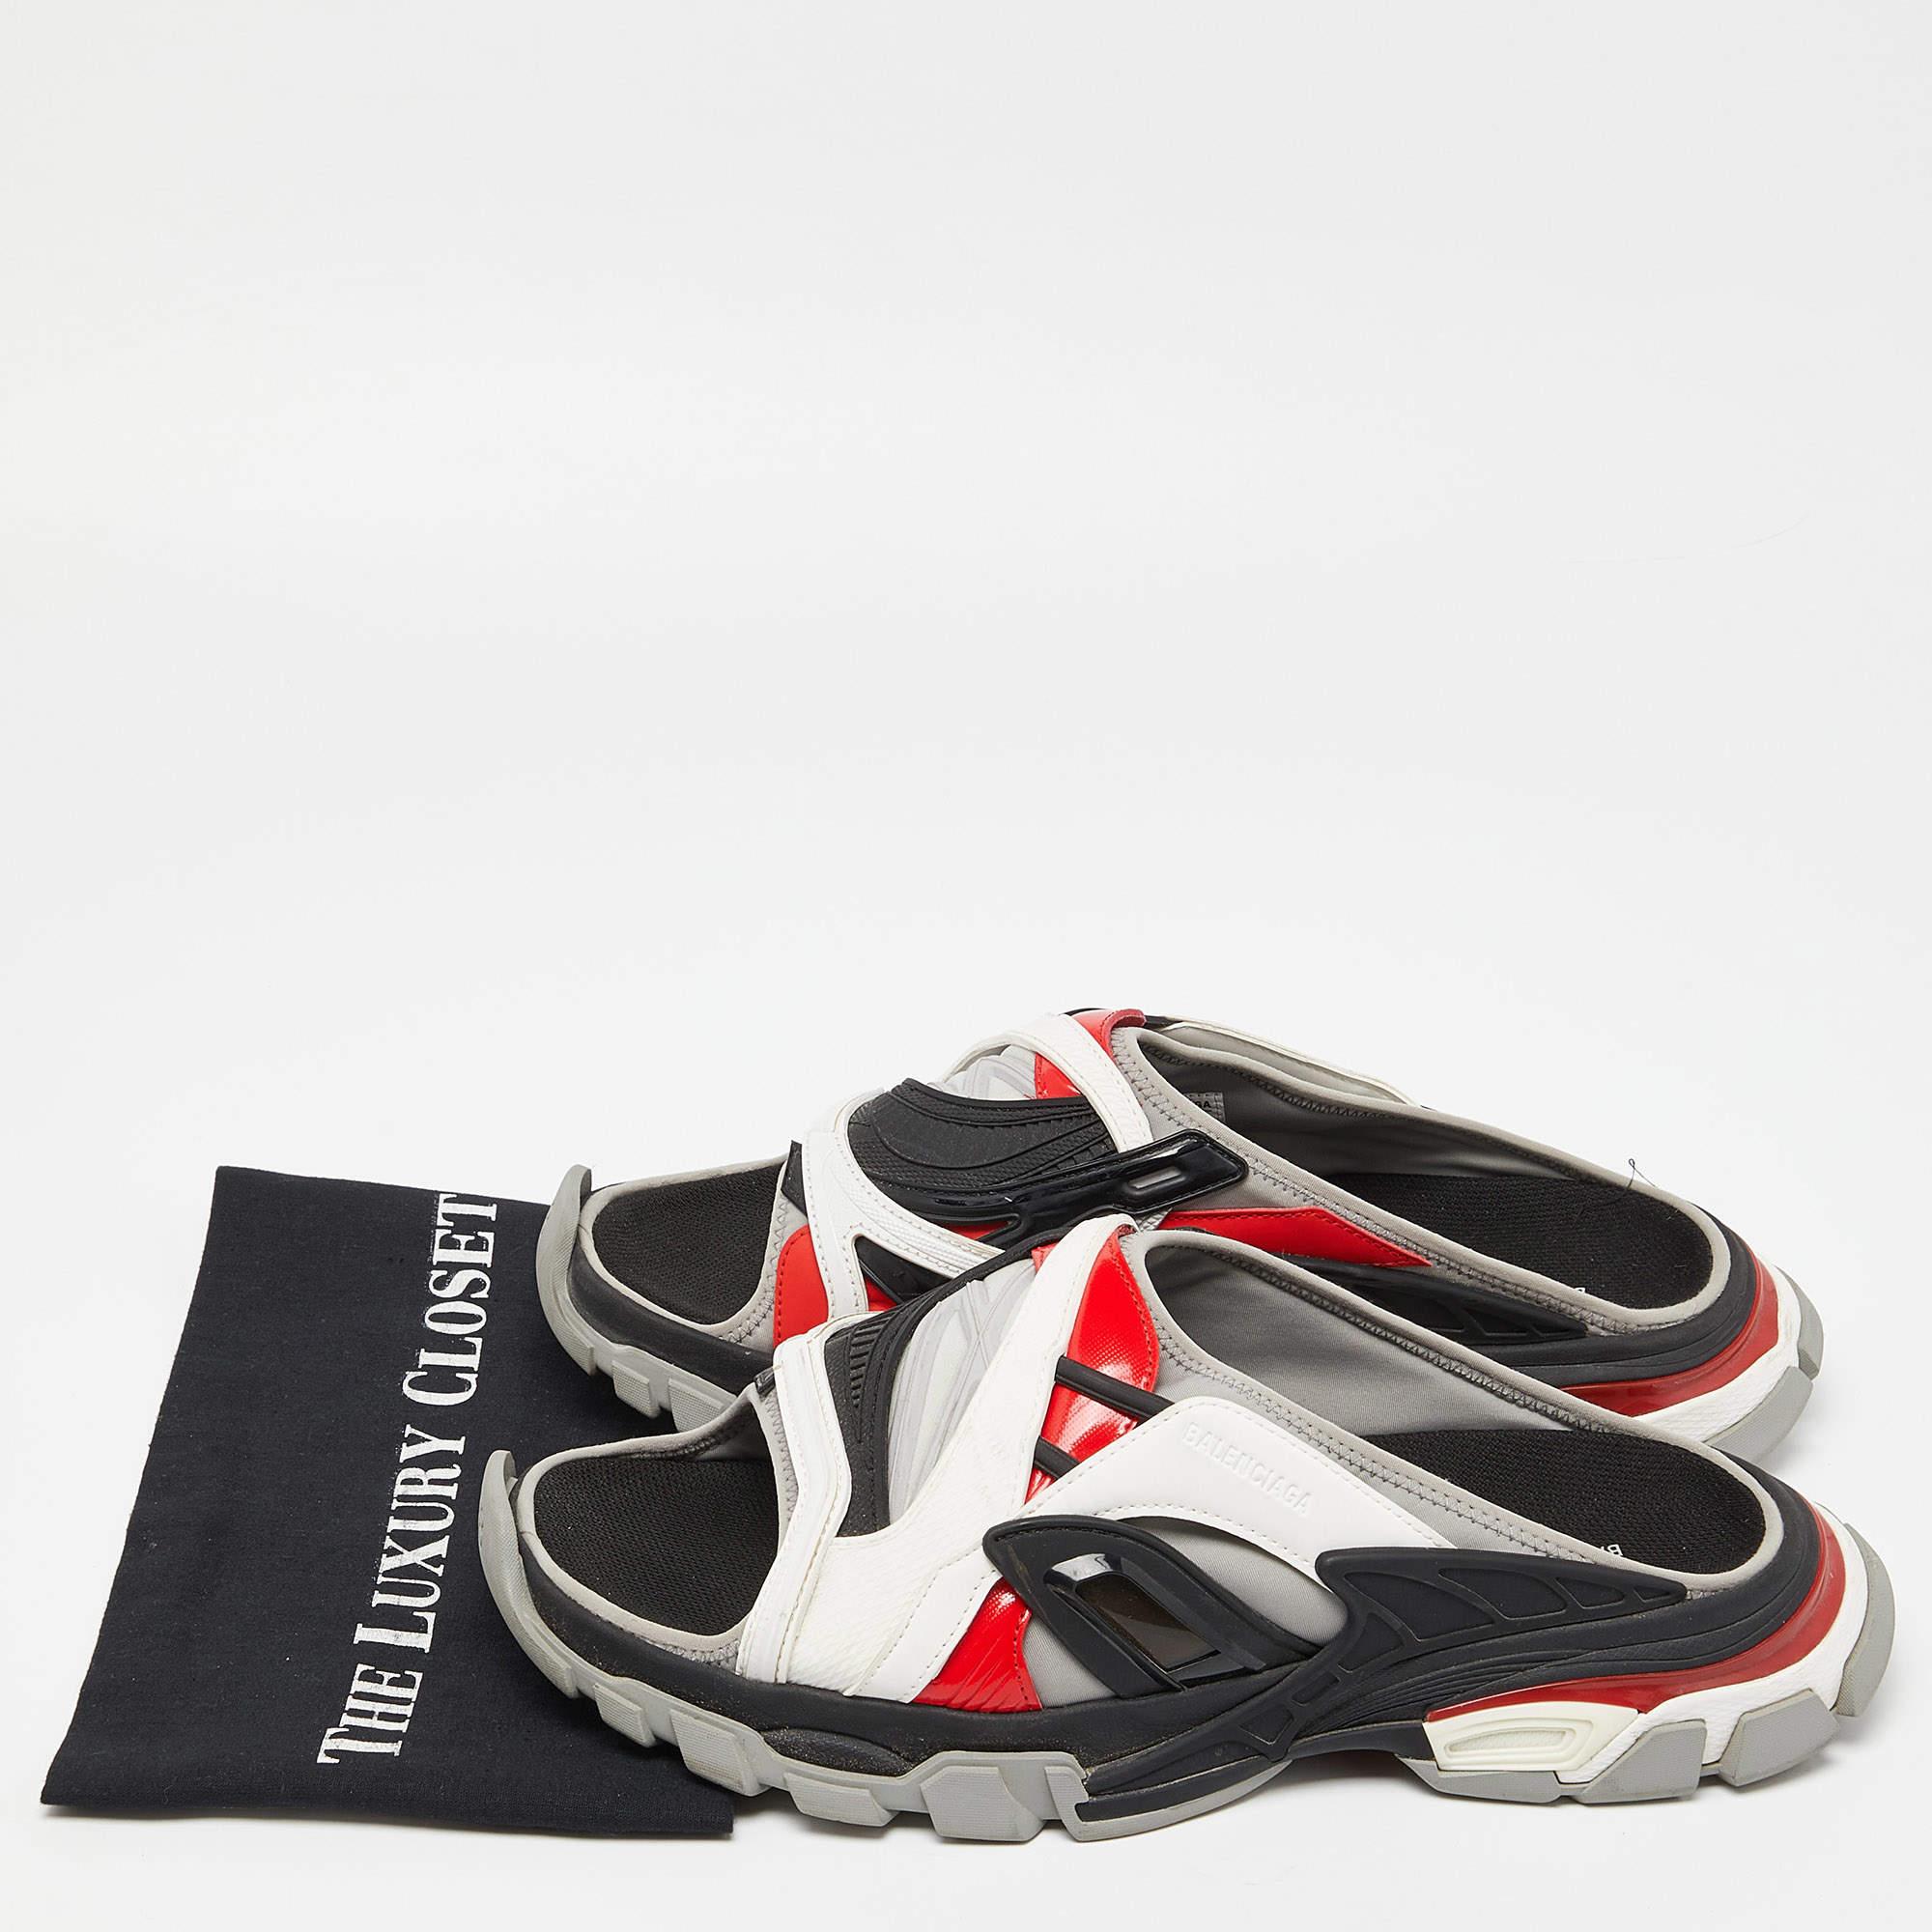 Balenciaga Tricolor Rubber and Leather Track Slides Size 45 4